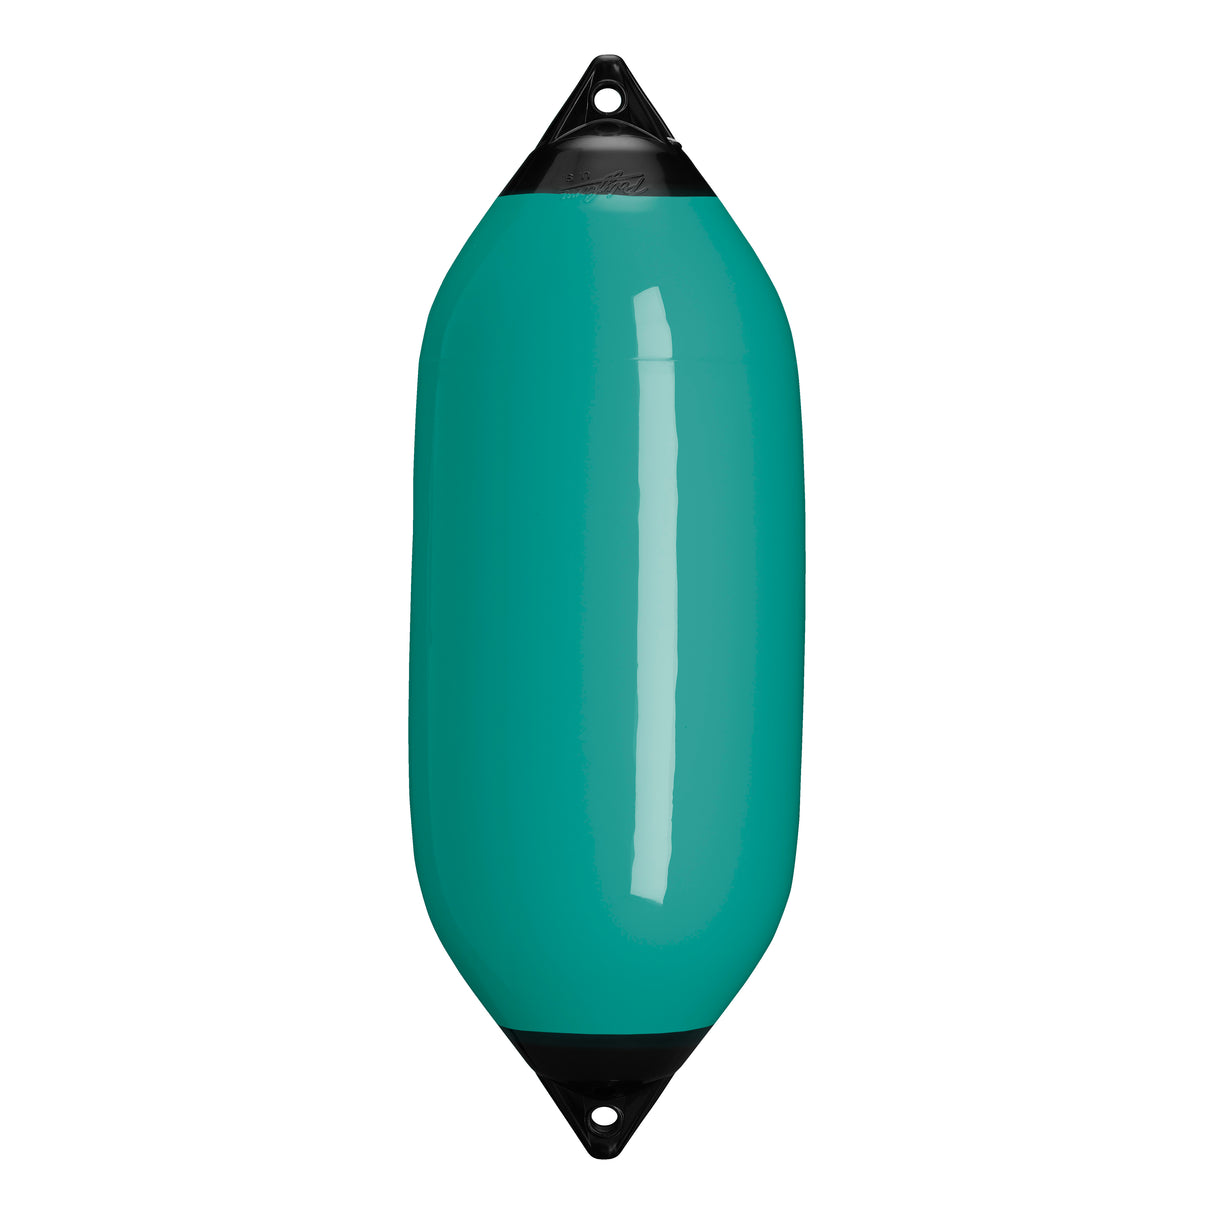 Teal boat fender with Black-Top, Polyform F-7